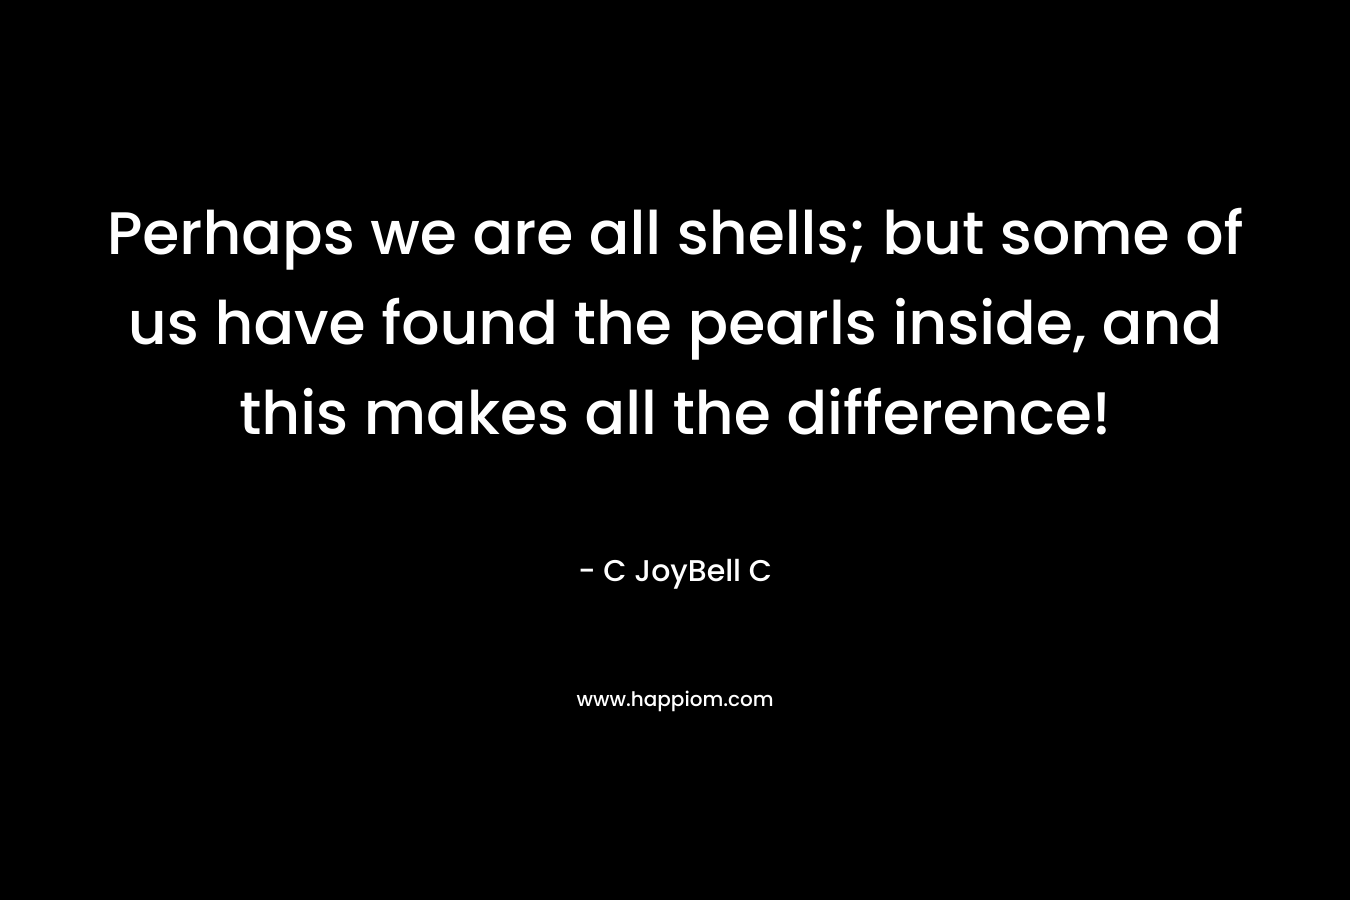 Perhaps we are all shells; but some of us have found the pearls inside, and this makes all the difference! – C JoyBell C